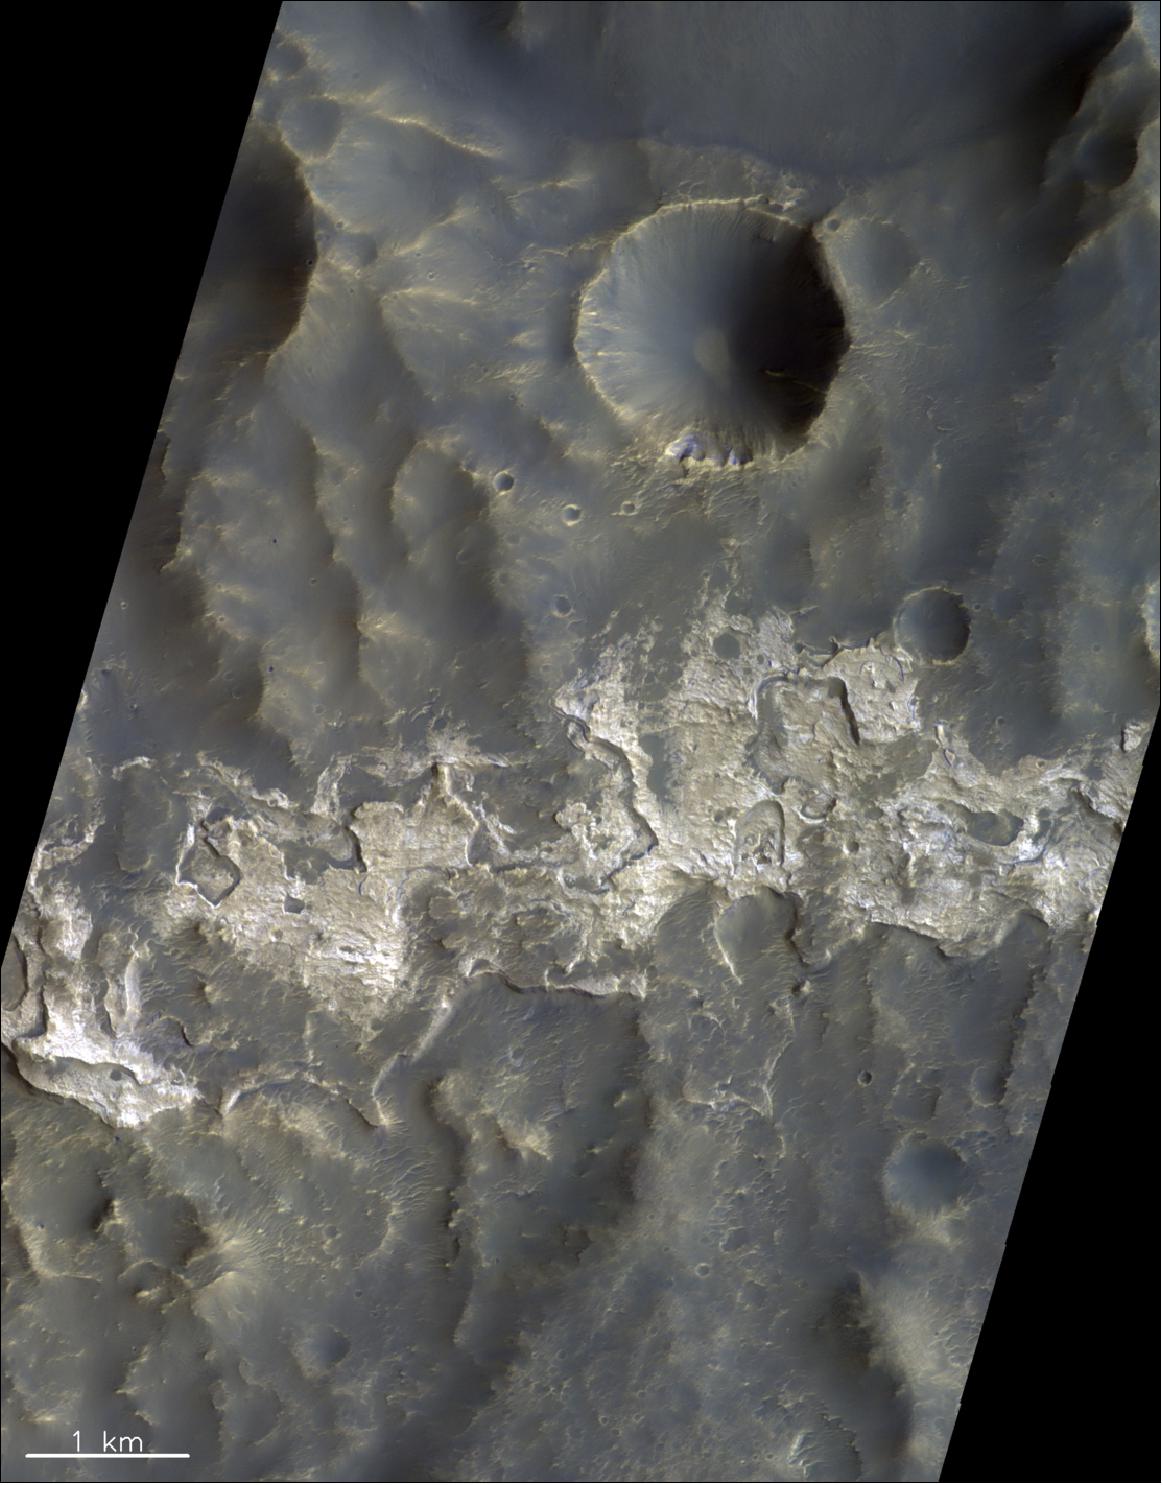 Figure 76: This image covers a portion of the wall-terrace region of the 100 km-wide Columbus Crater located within Terra Sirenum in the southern hemisphere of Mars. The image was taken by the CaSSIS instrument onboard the ESA-Roscosmos ExoMars TGO on 15 January 2019. The image is centered at 28.79ºS/193.84ºE. North is up (image credit: ESA/Roscosmos/CaSSIS, CC BY-SA 3.0 IGO)